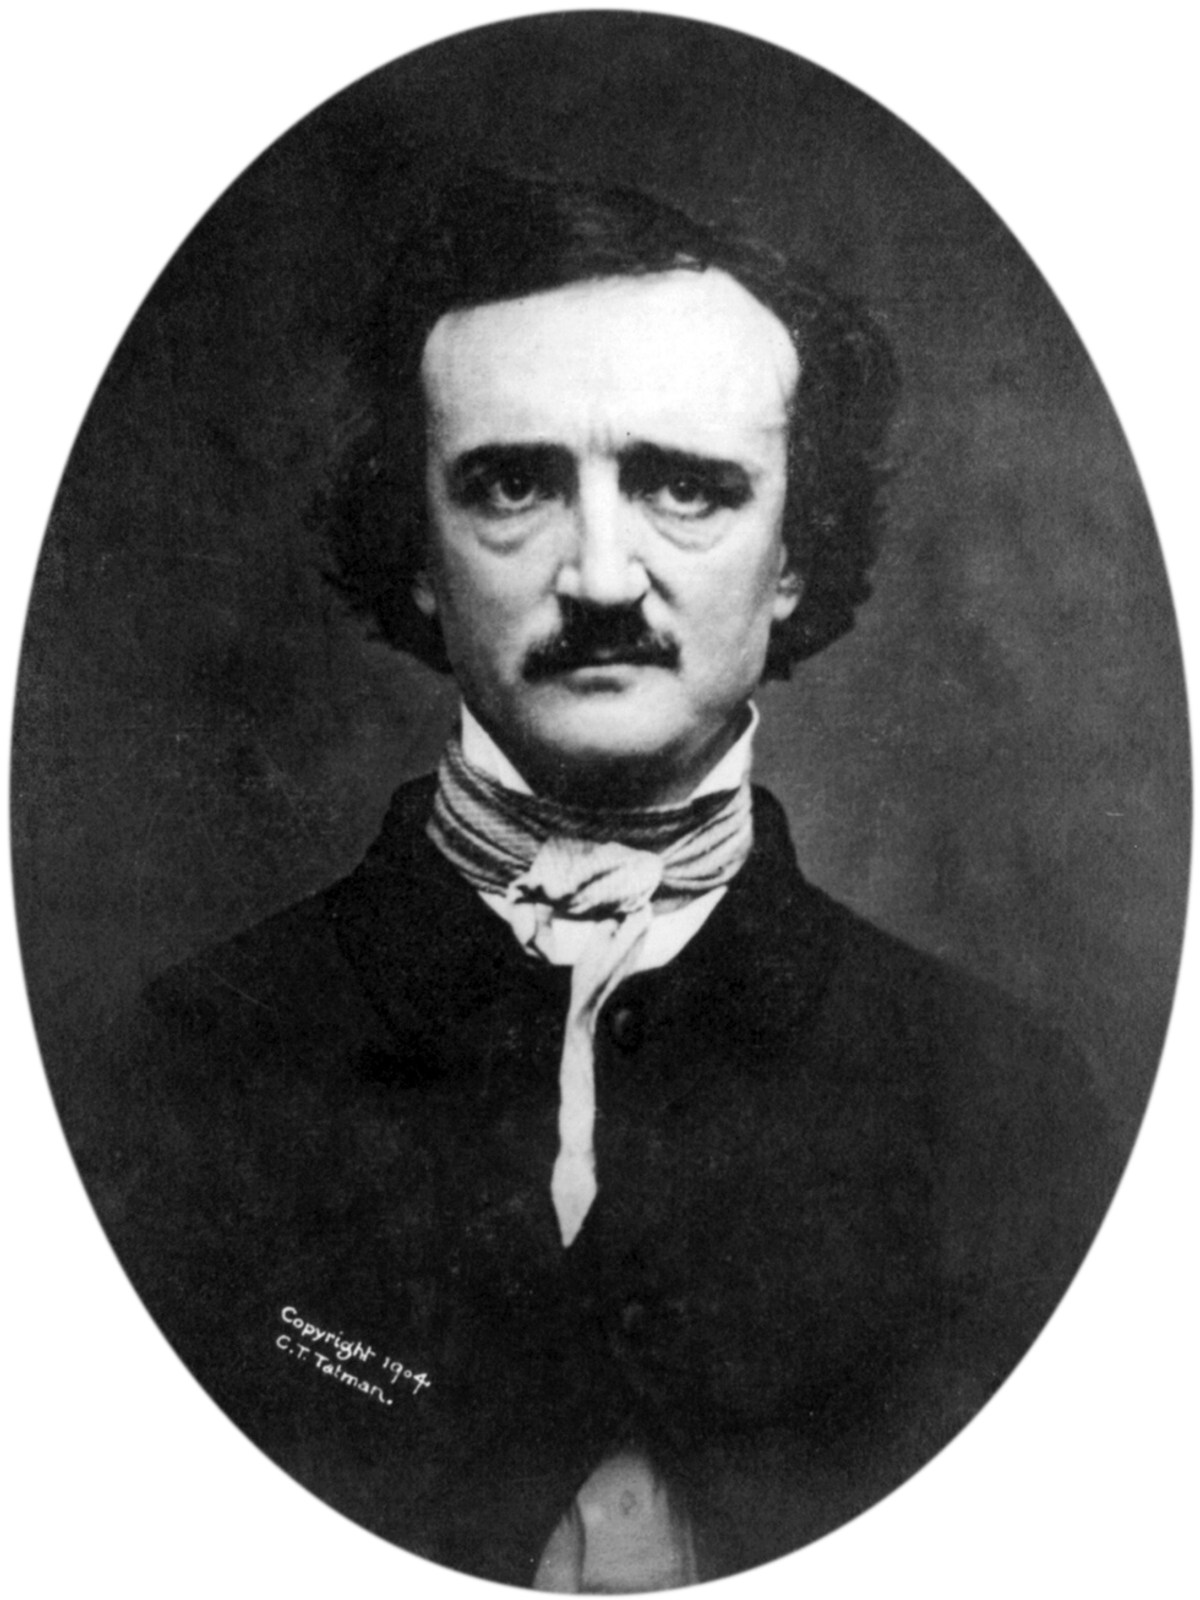 9 Poems By Edgar Allan Poe To read Besides "The Raven"